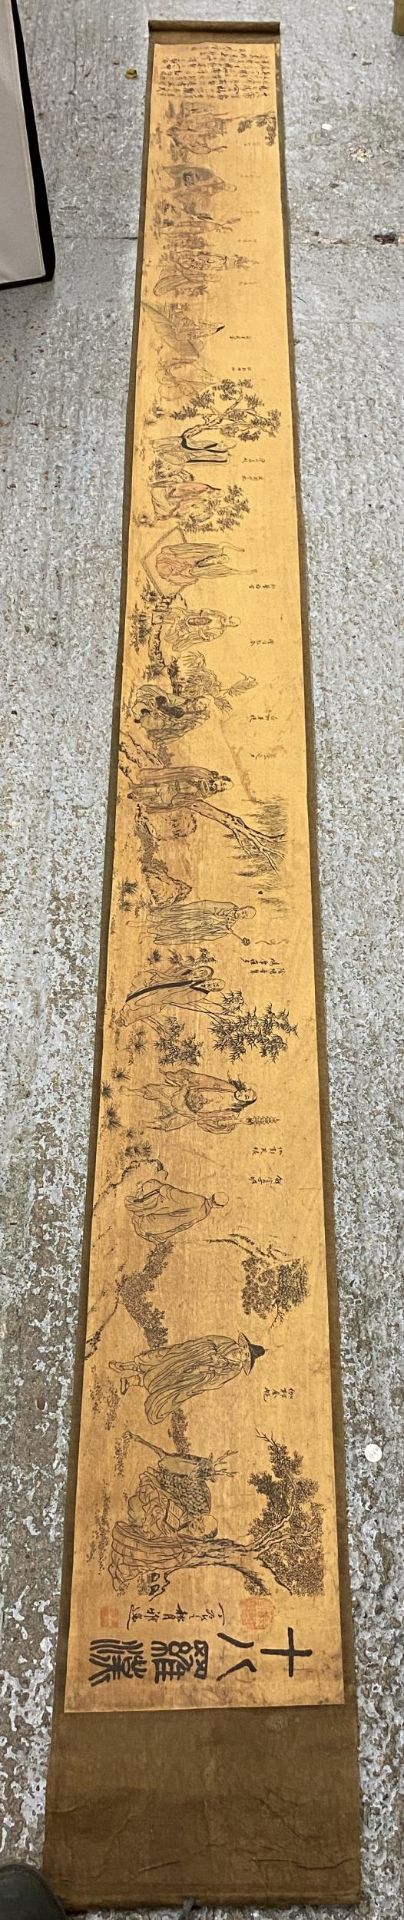 A LARGE 19TH CENTURY JAPANESE TAPESTRY SCROLL, LENGTH 370CM